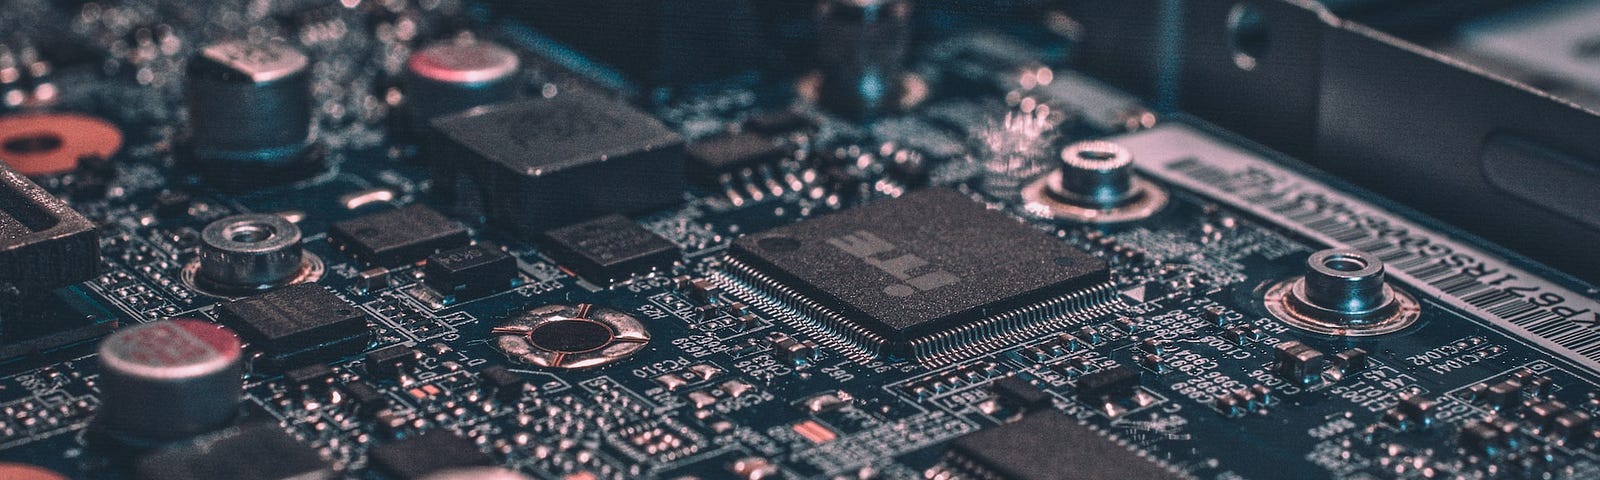 IMAGE: A closeup of a board with electronic components